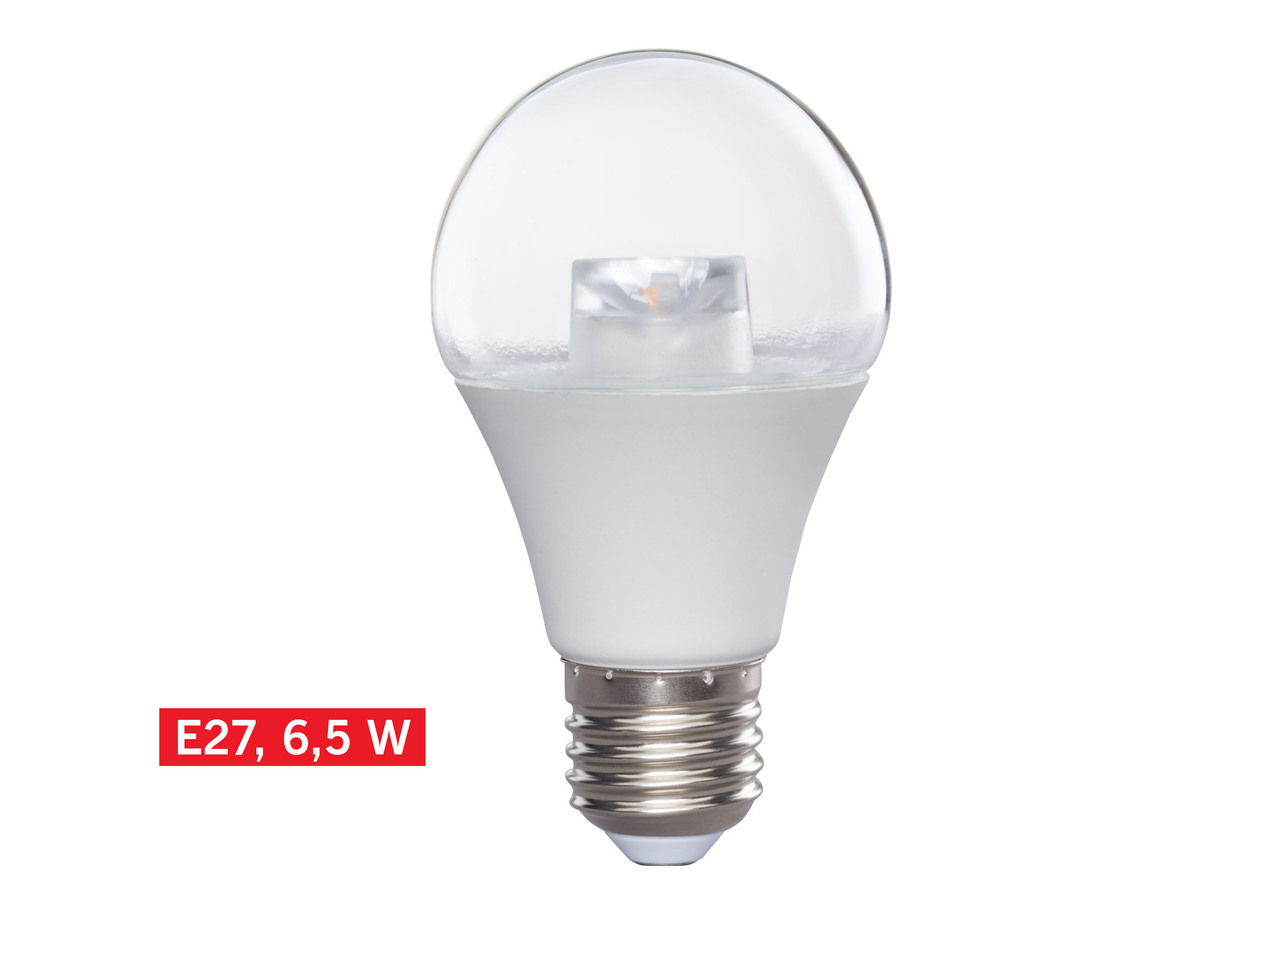 Dimmable LED Lamp, 5.5W-6.5W